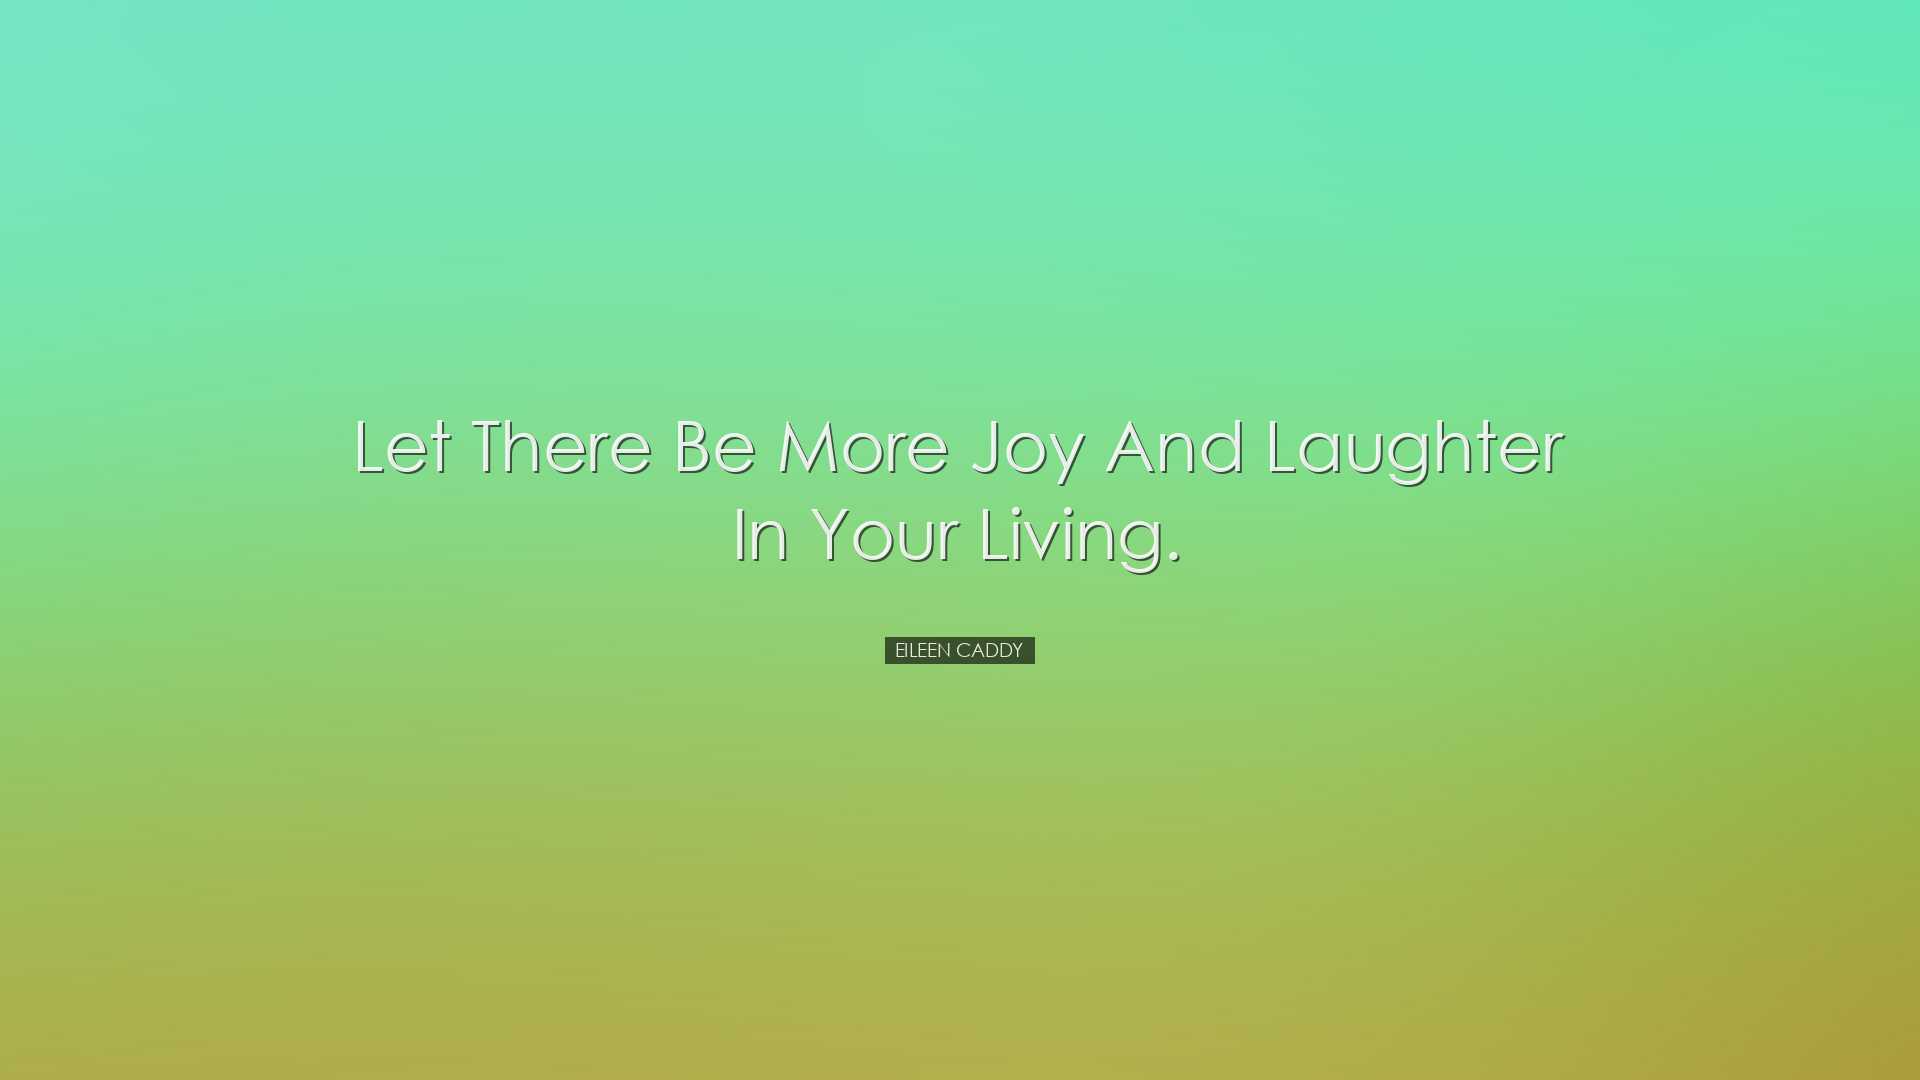 Let there be more joy and laughter in your living. - Eileen Caddy